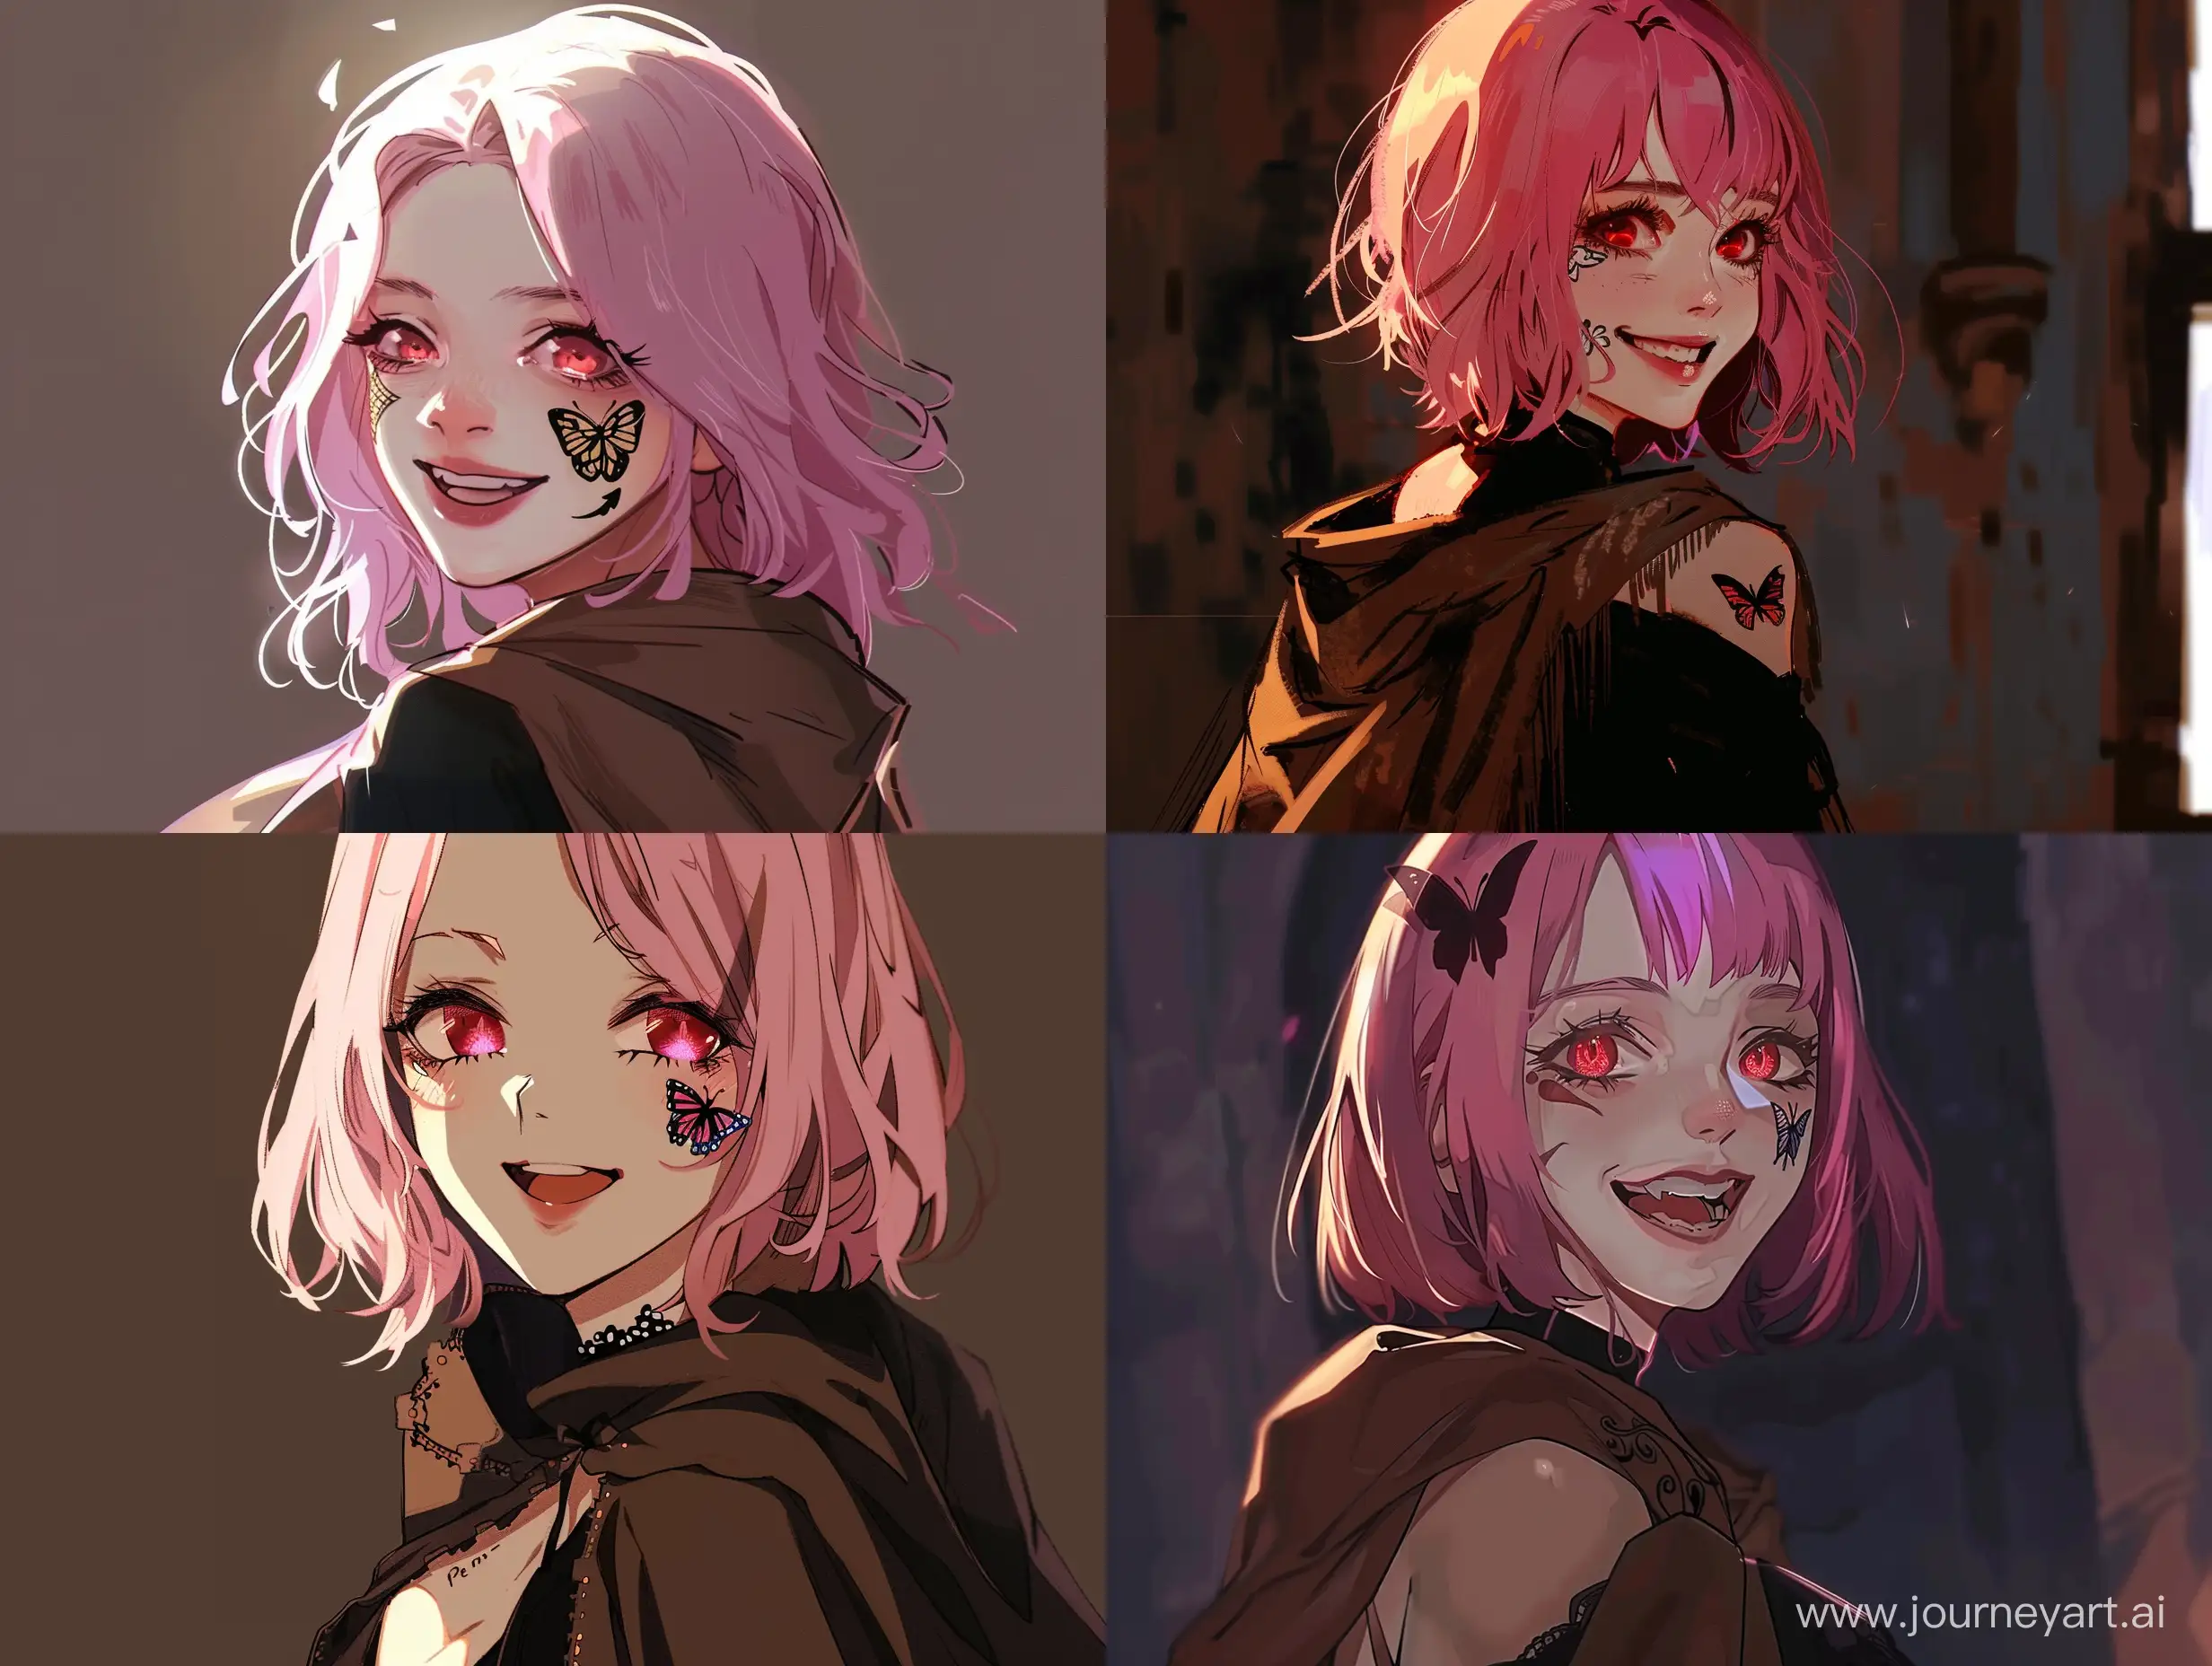 anime art, girl, pink hair, a butterfly tattoo on her cheek, red eyes, smiling cheerfully as if the world brightened following her smile, wearing elegant black dress and brown cloak.